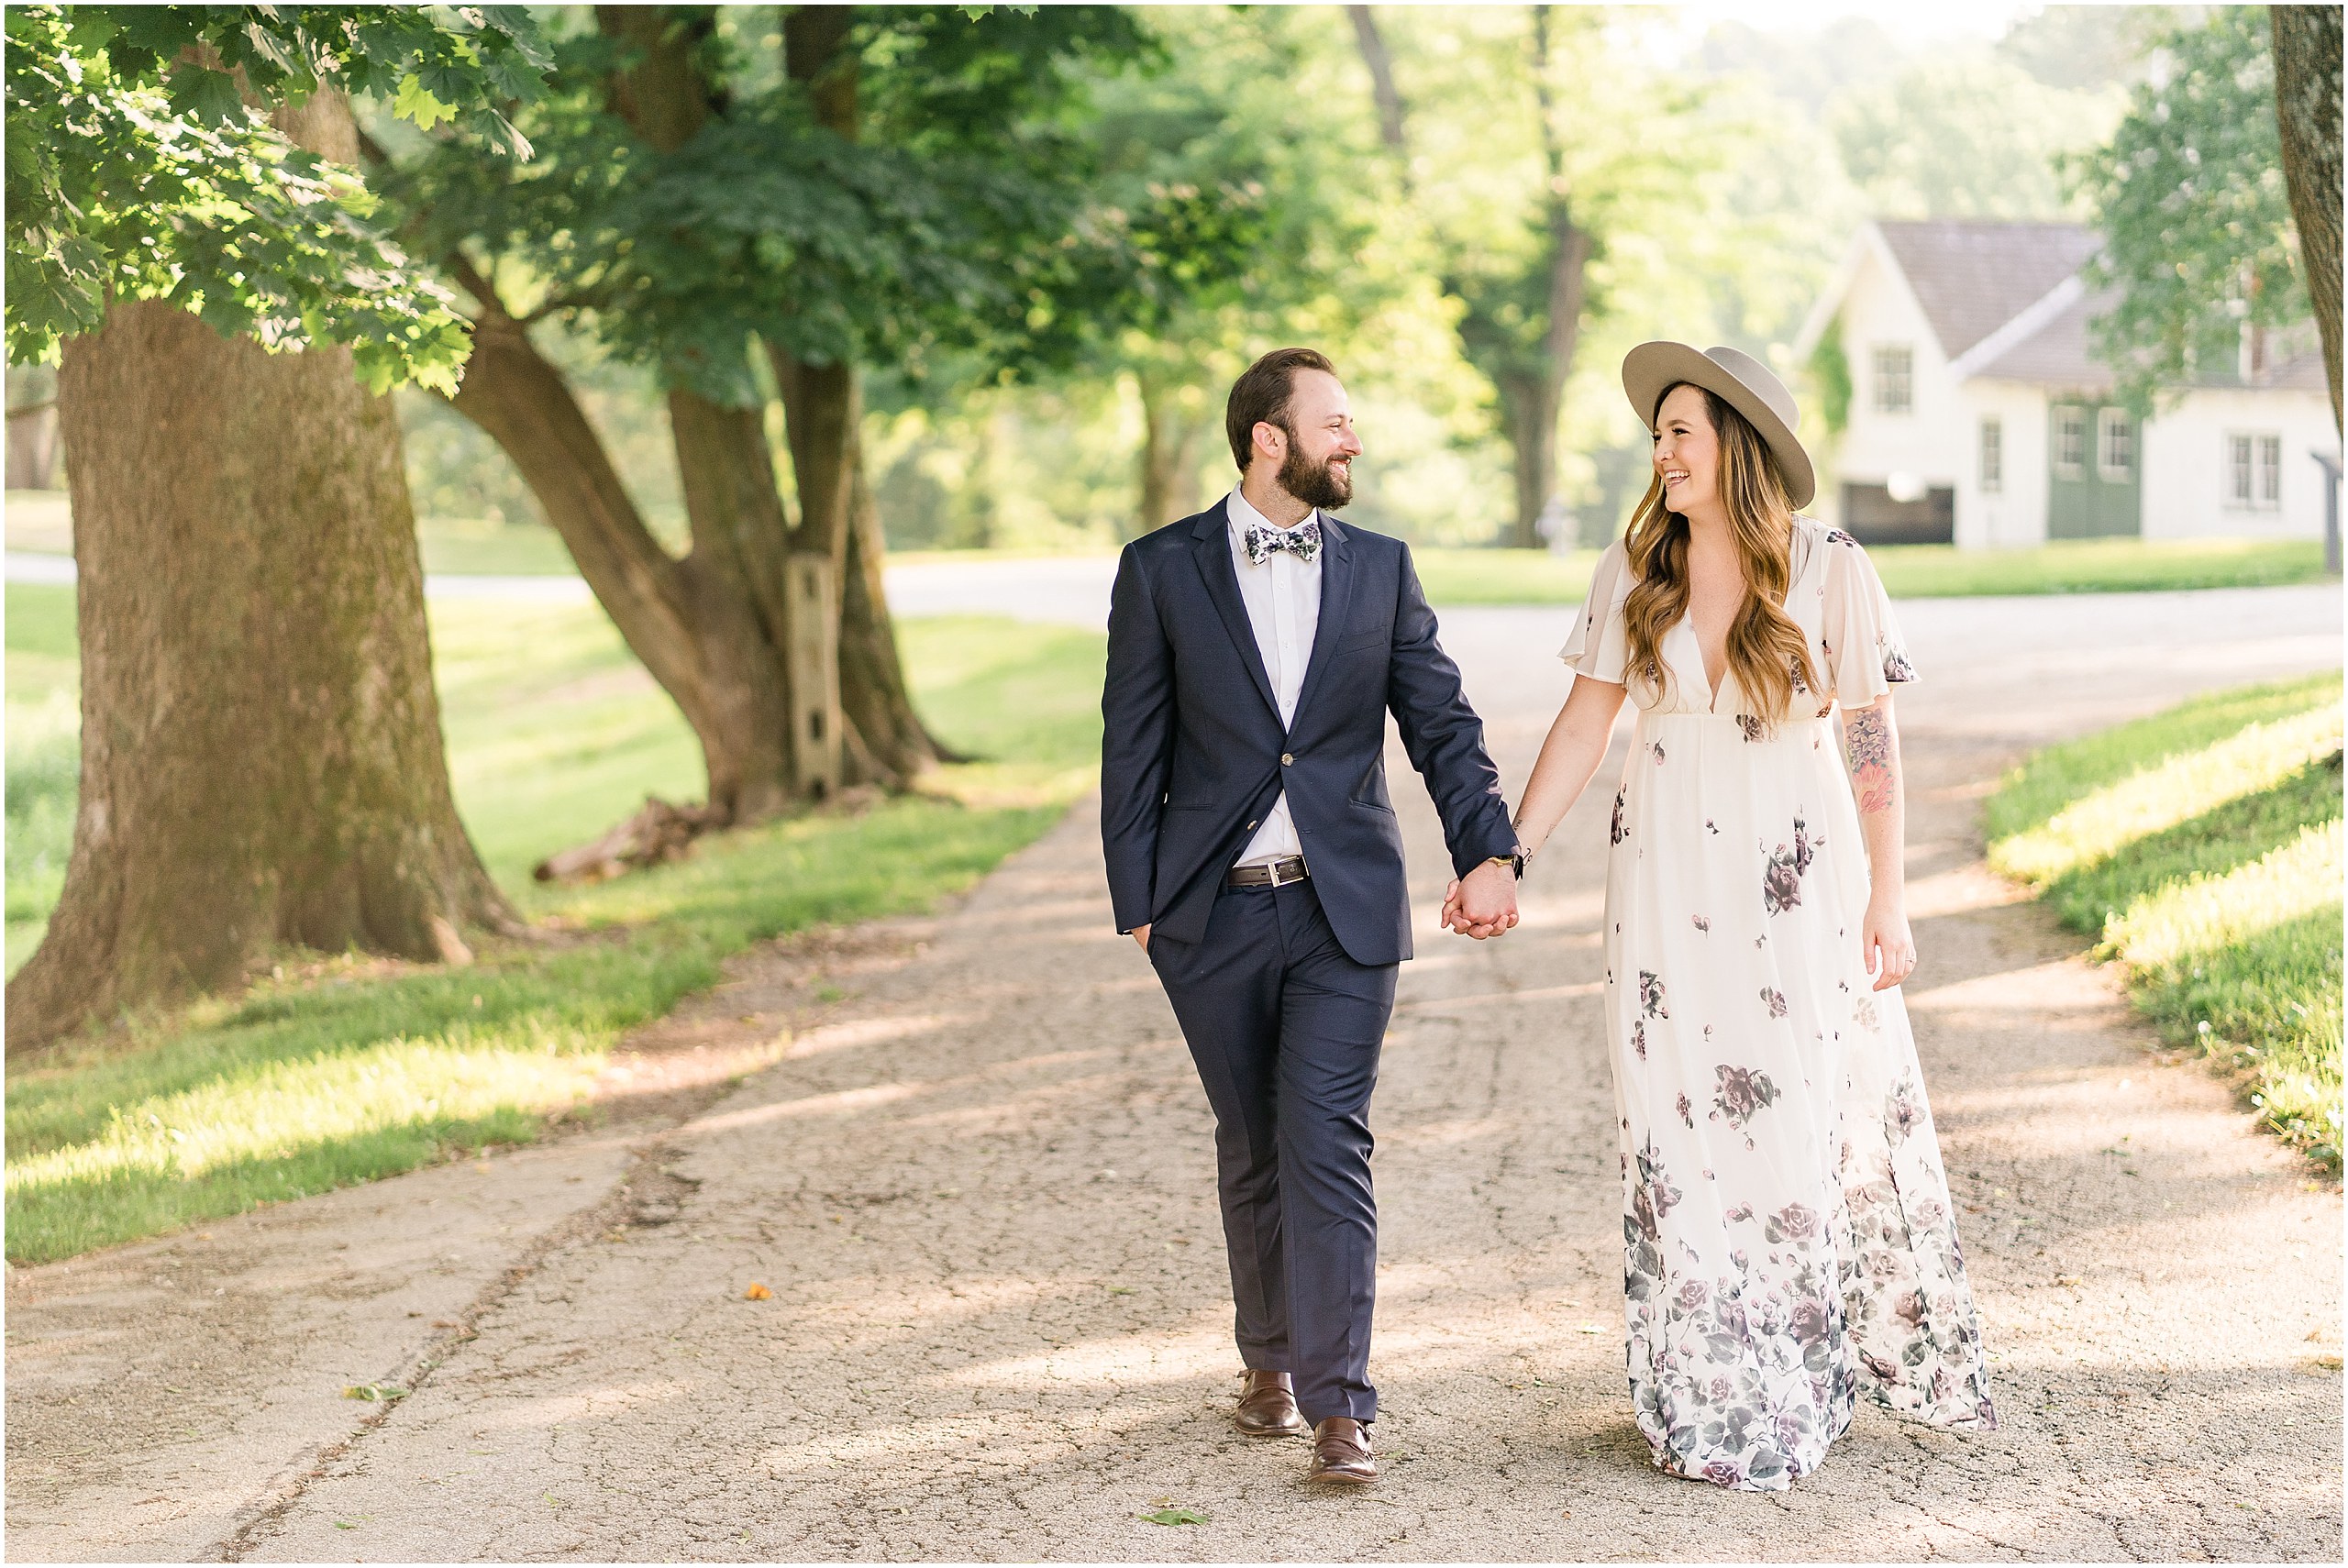 Ryan Lauren's Boho Chic Engagement Session at Valley Forge Park Photos